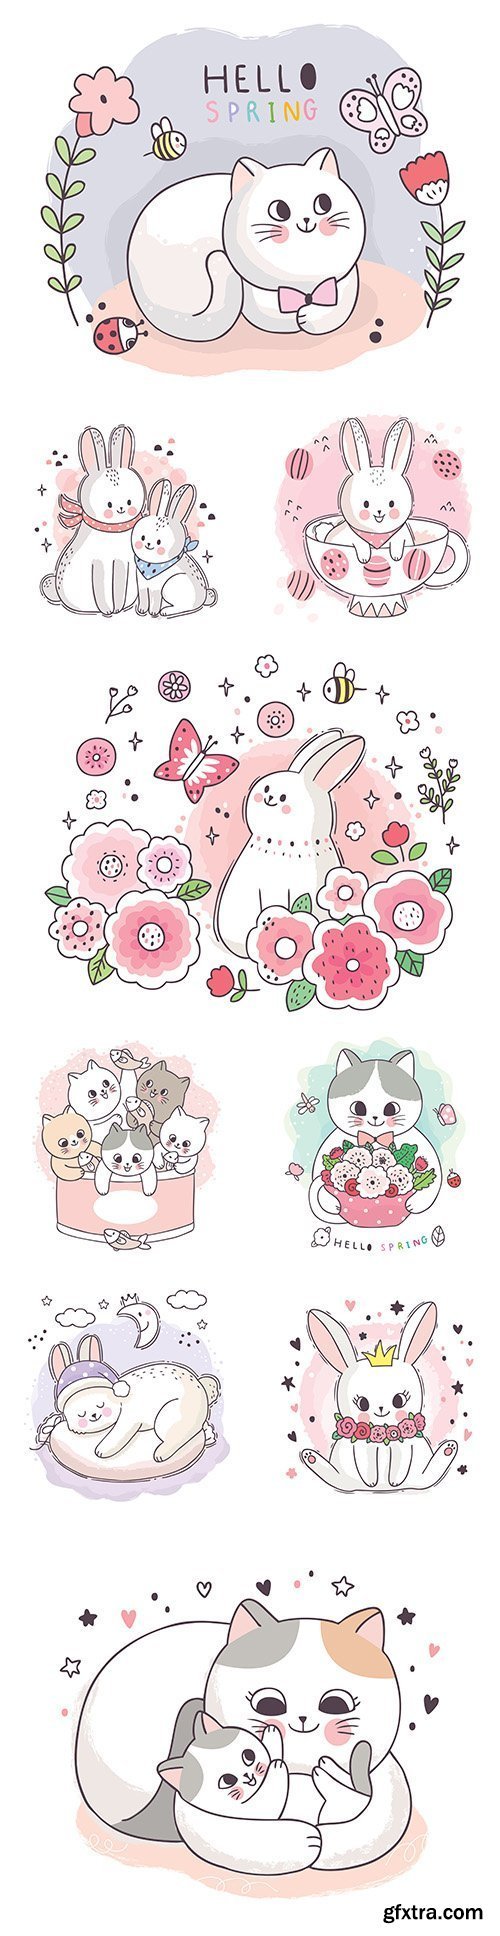 Cute kitten and Easter bunny cartoon painted illustrations